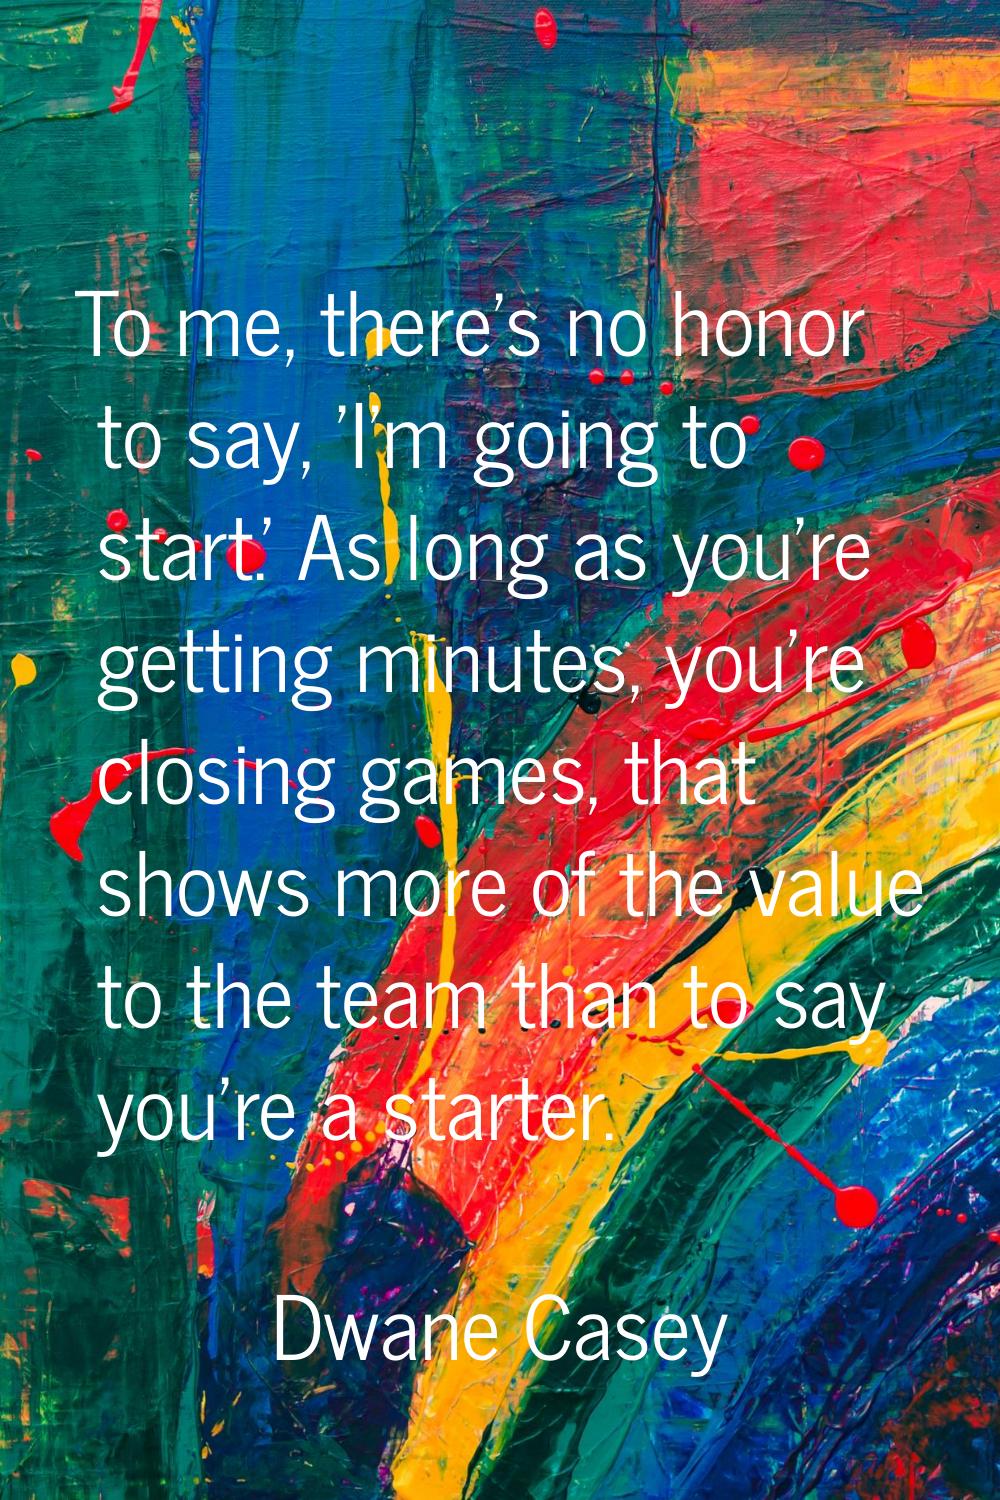 To me, there's no honor to say, 'I'm going to start.' As long as you're getting minutes, you're clo